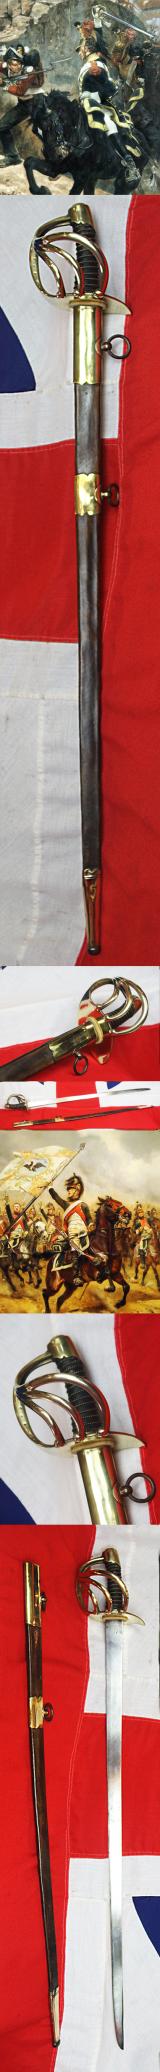 A Superb, French, 1st Empire Napoleonic Wars Cuirassier-Dragoon Sword In Fabulous Condition With Brass and Leather Scabbard